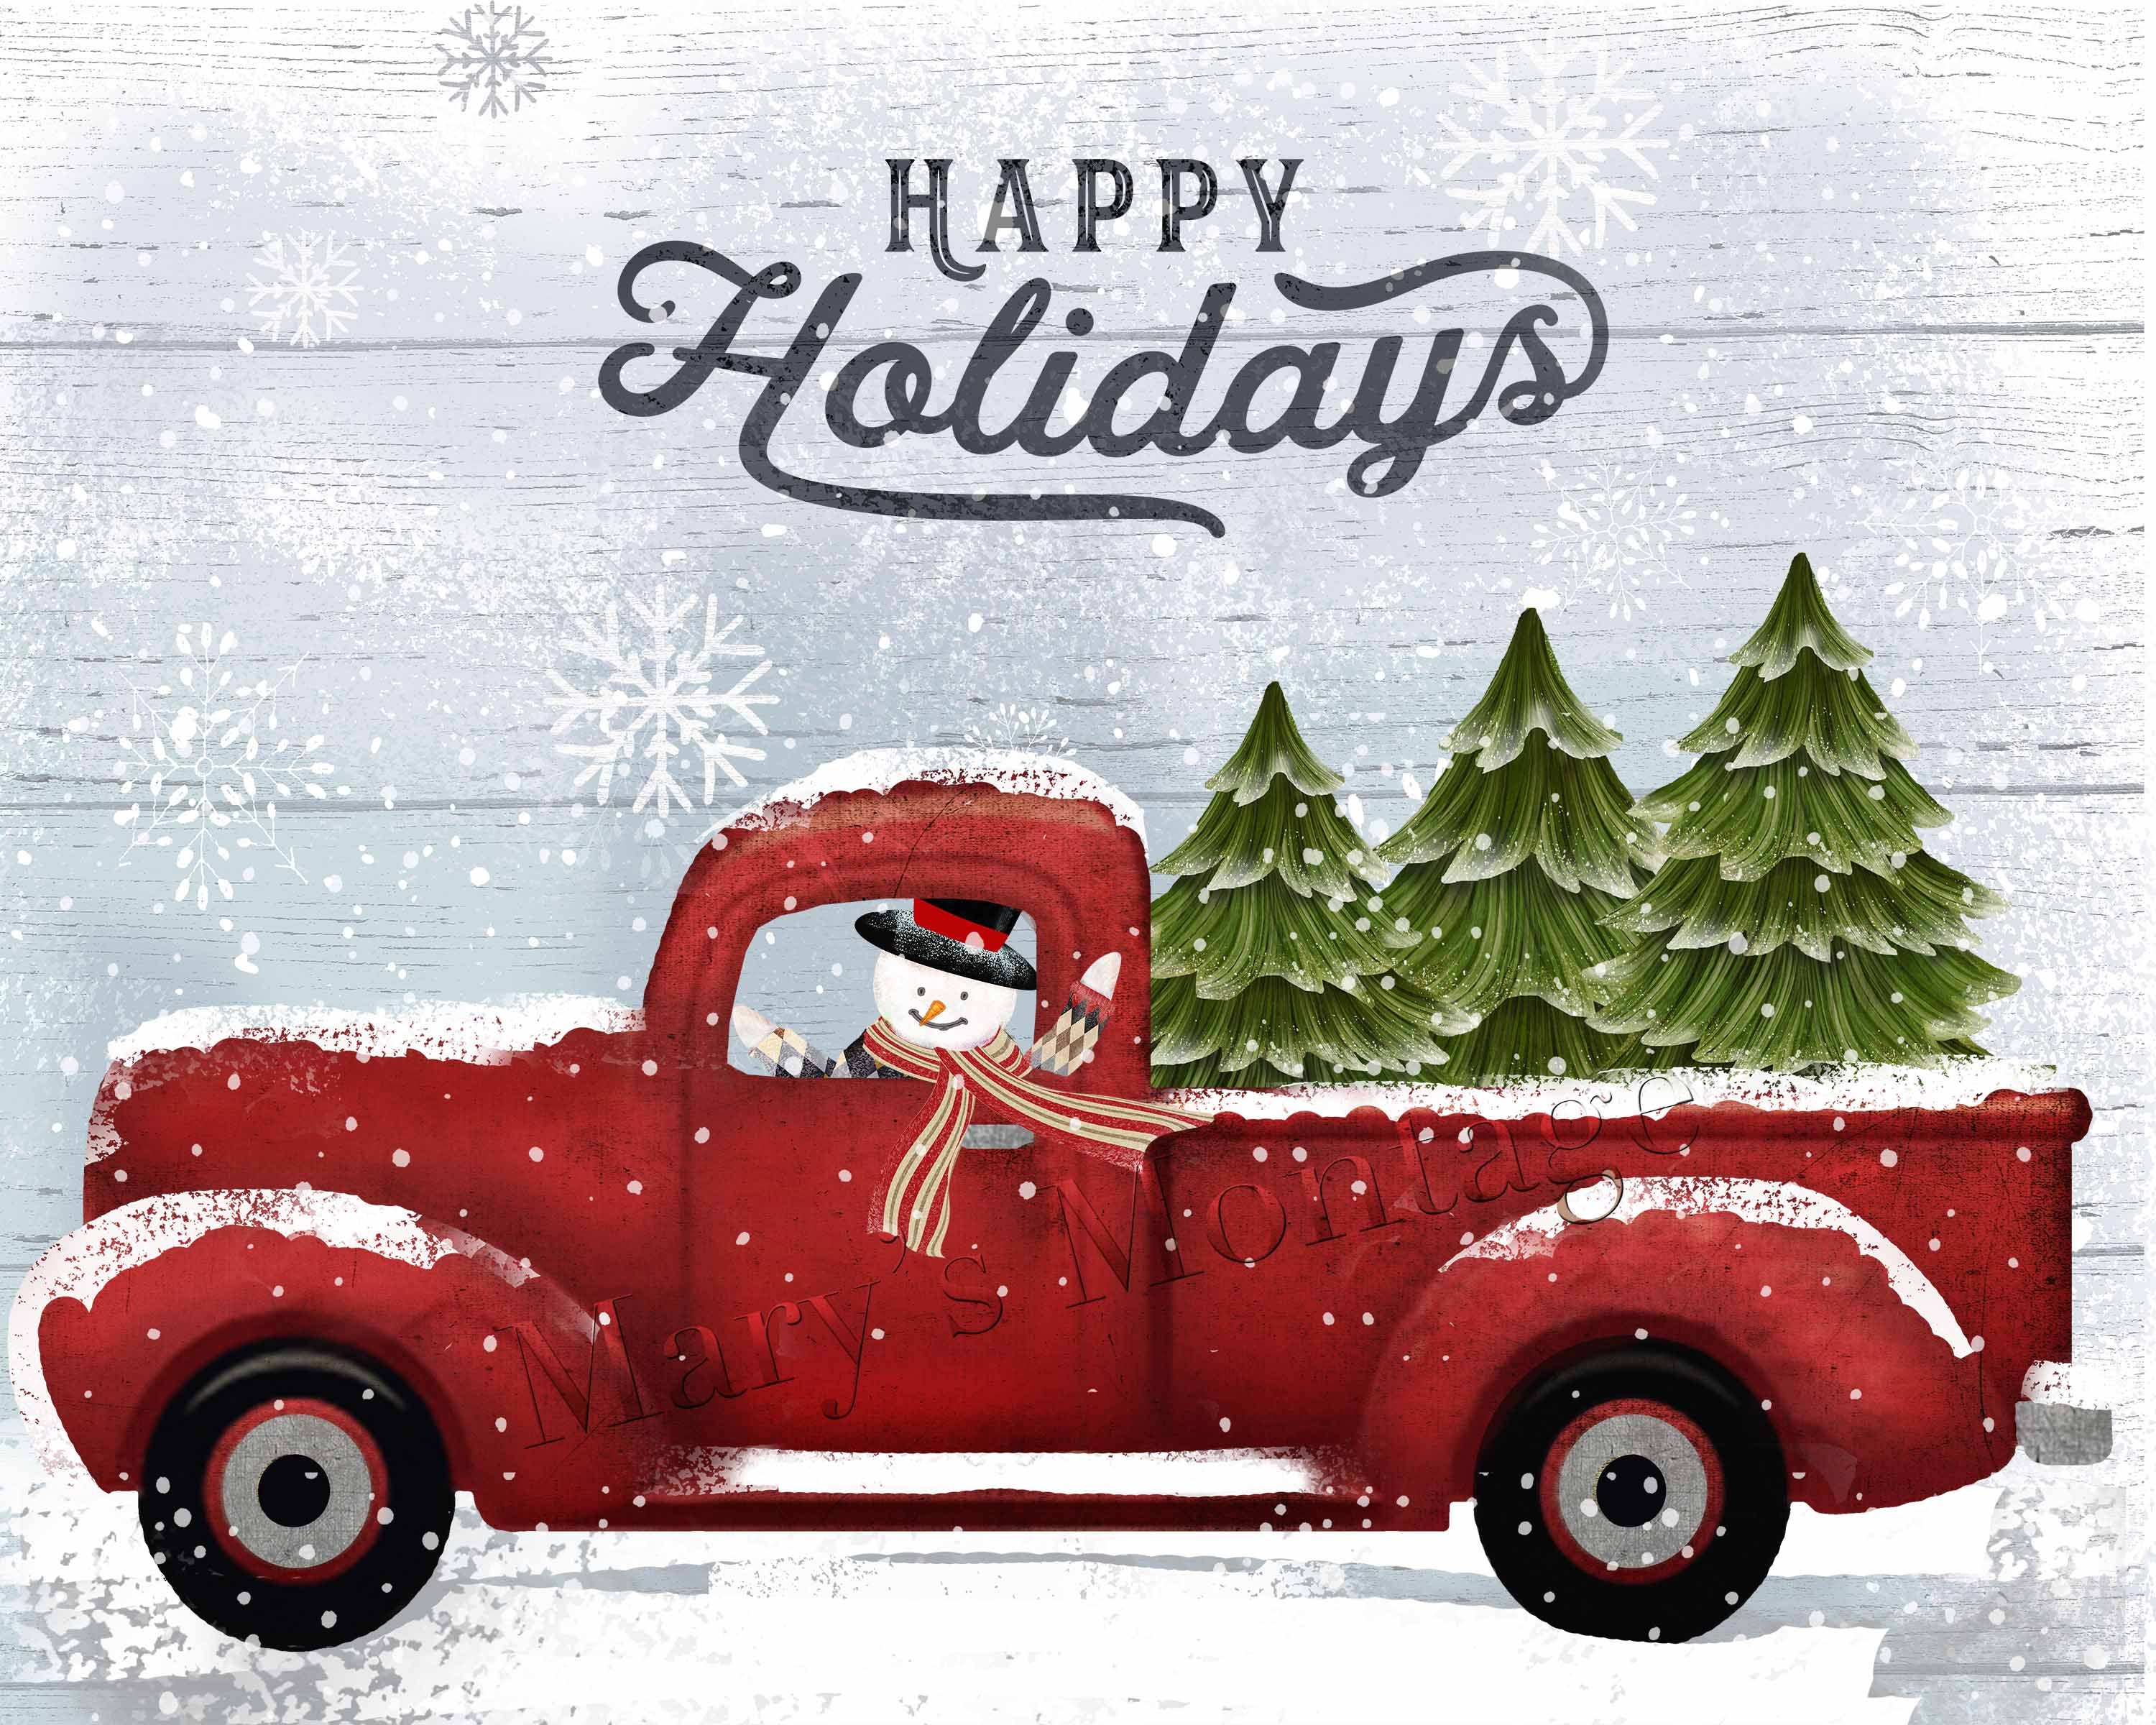 HD wallpaper pink pickup truck toy with Merry Christmas text red festive   Wallpaper Flare